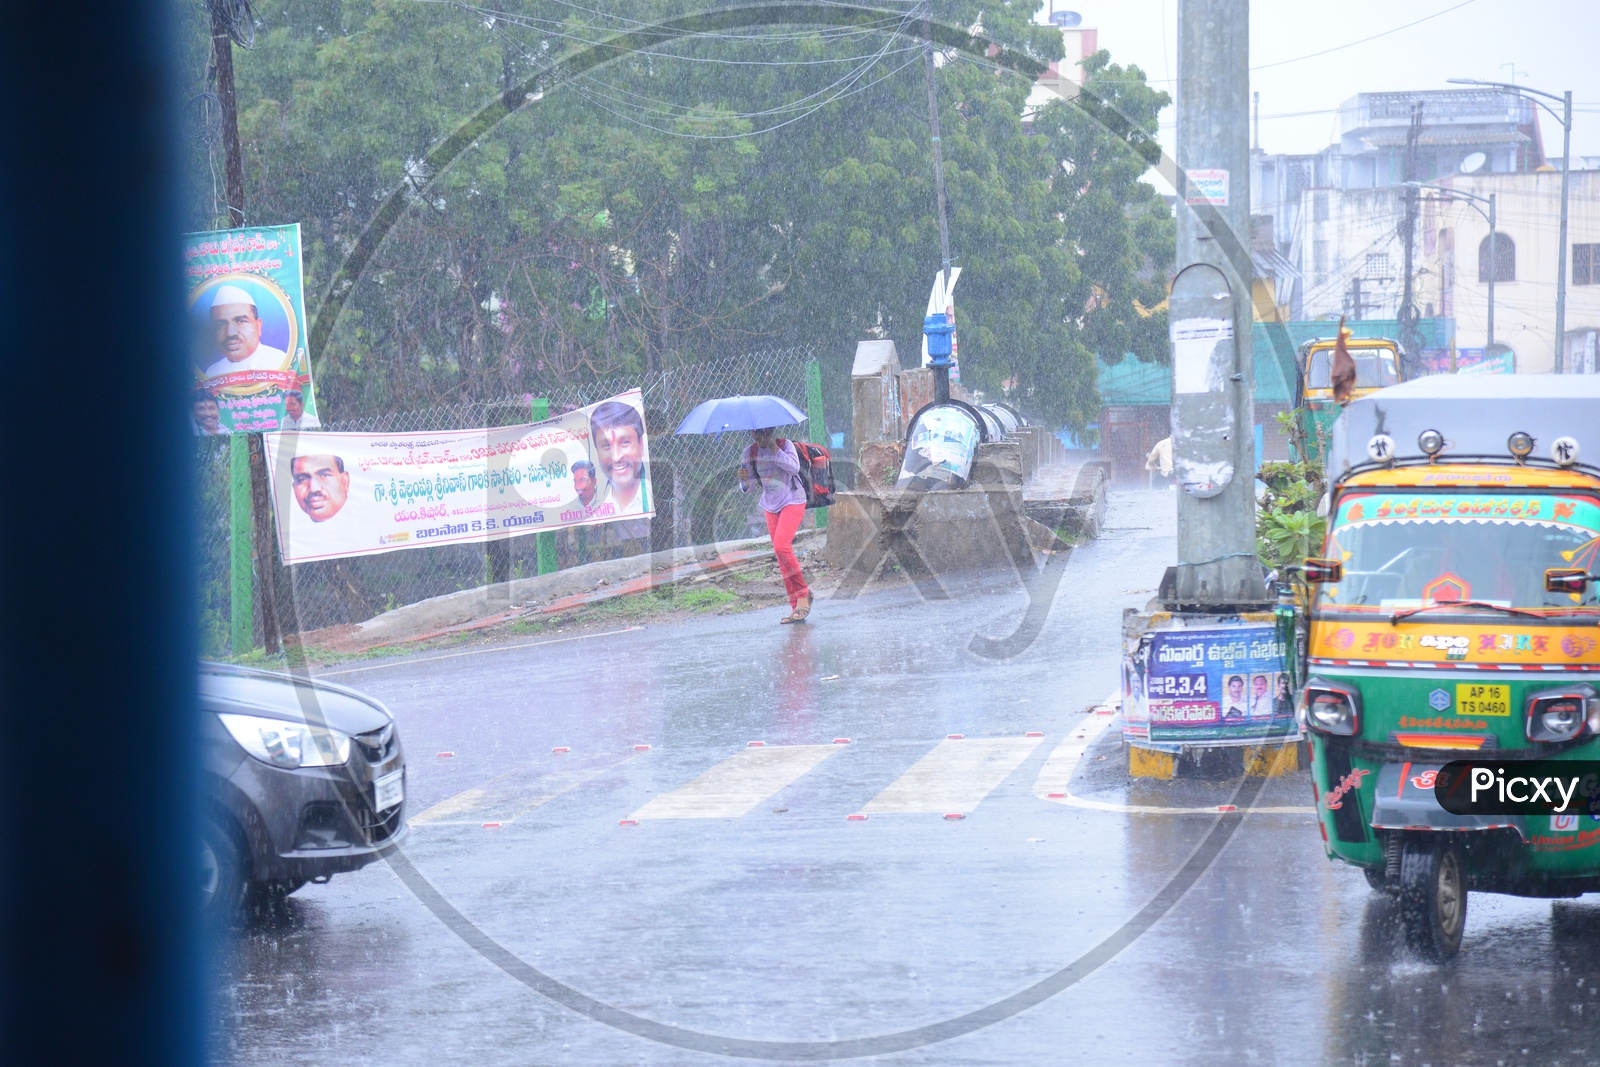 A girl walking with an umbrella on the road while its raining